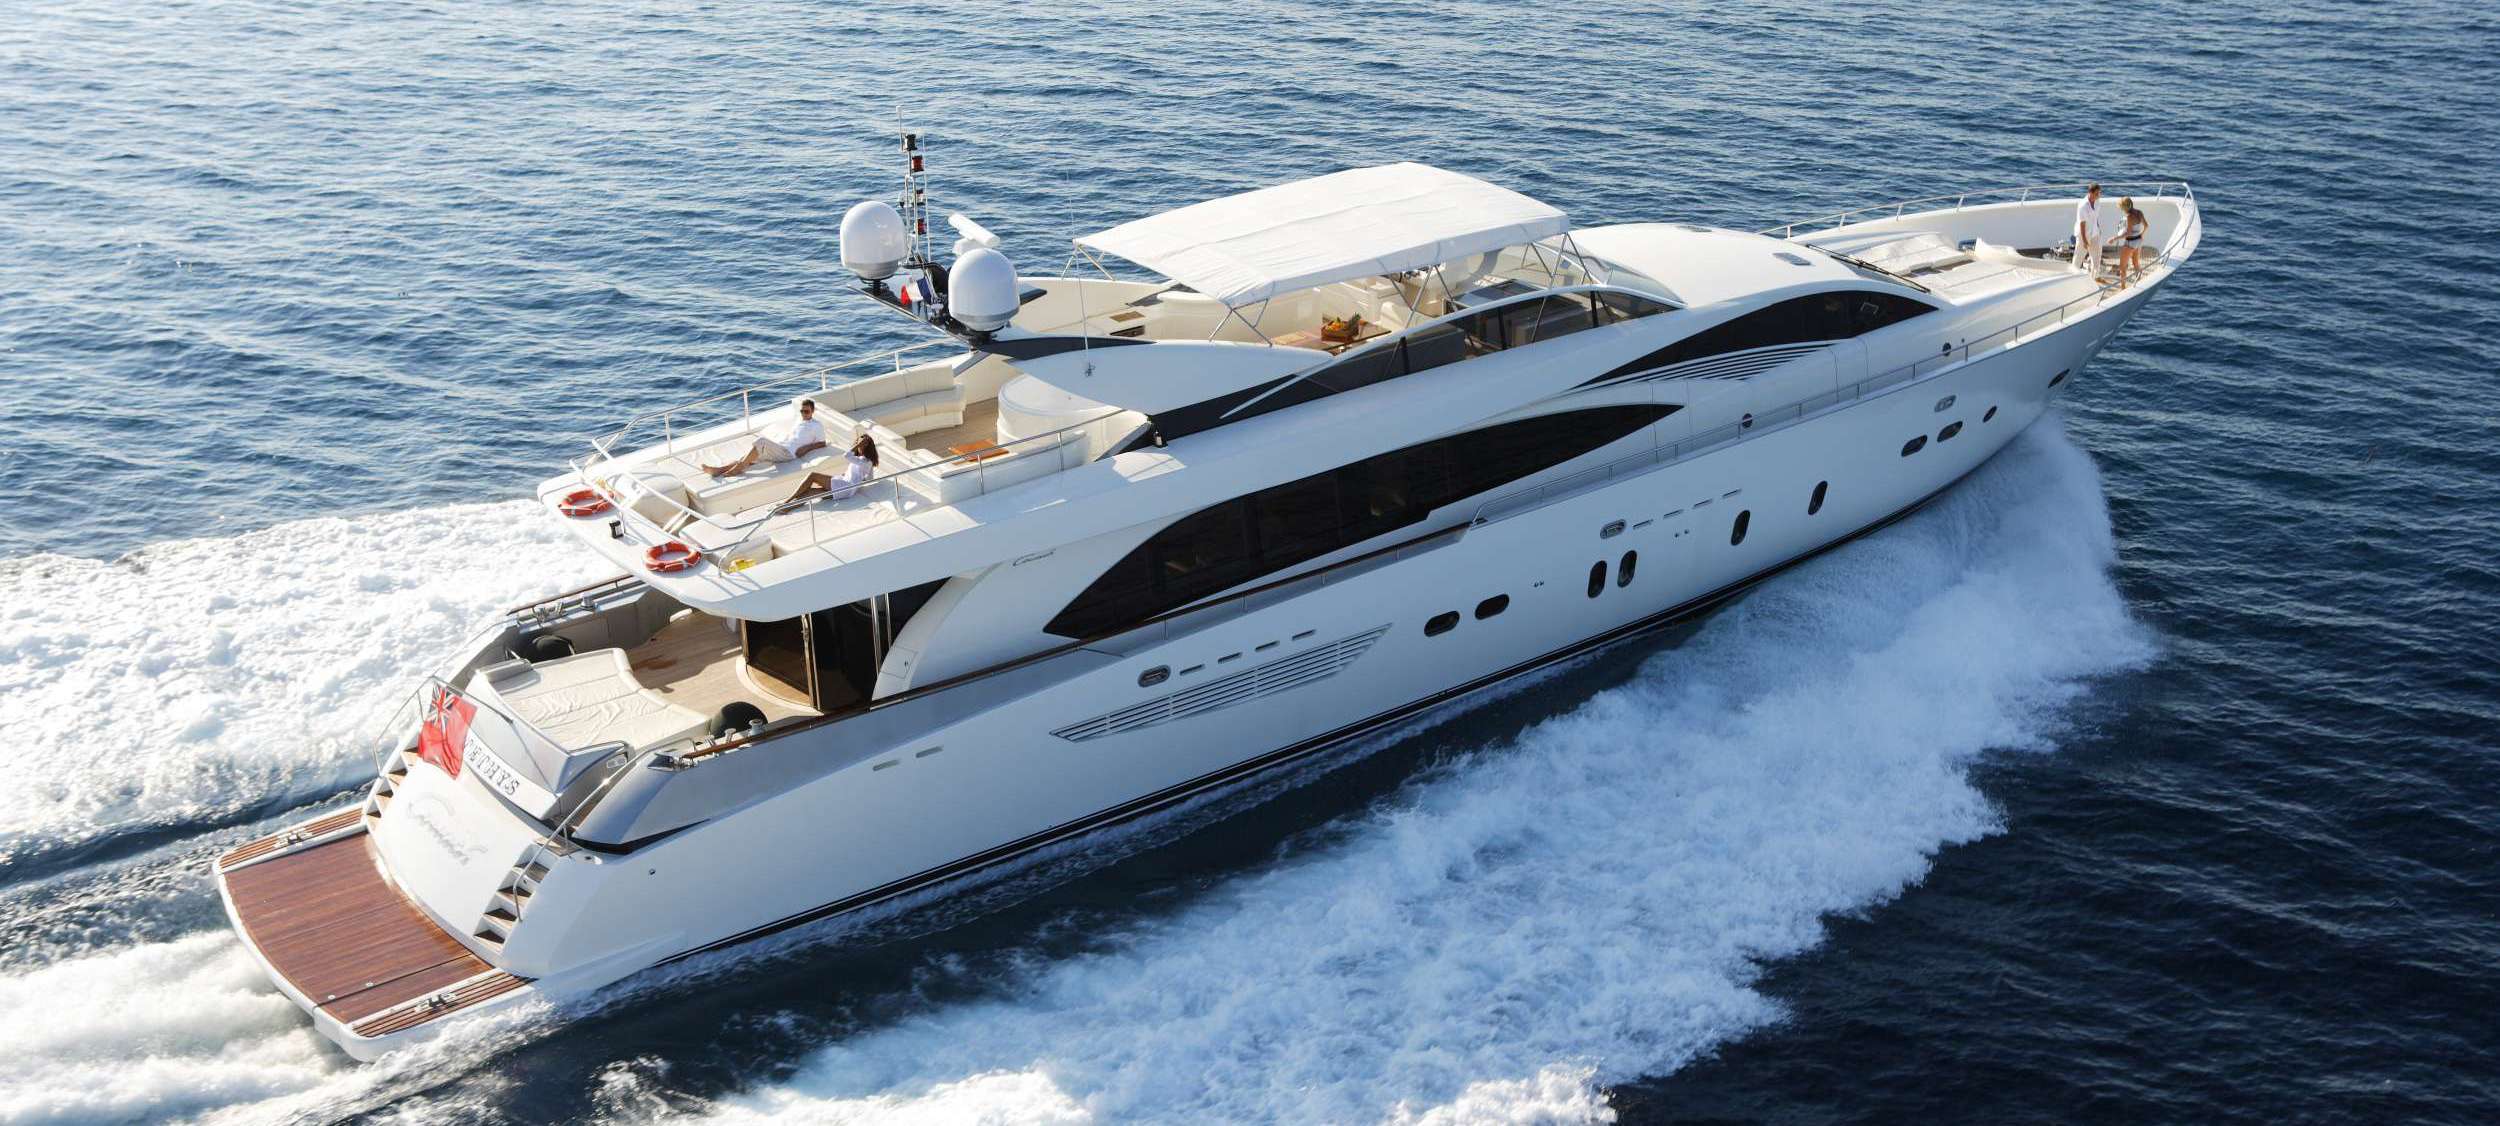 ECLIPSE 114 - Superyacht charter worldwide & Boat hire in Caribbean 1